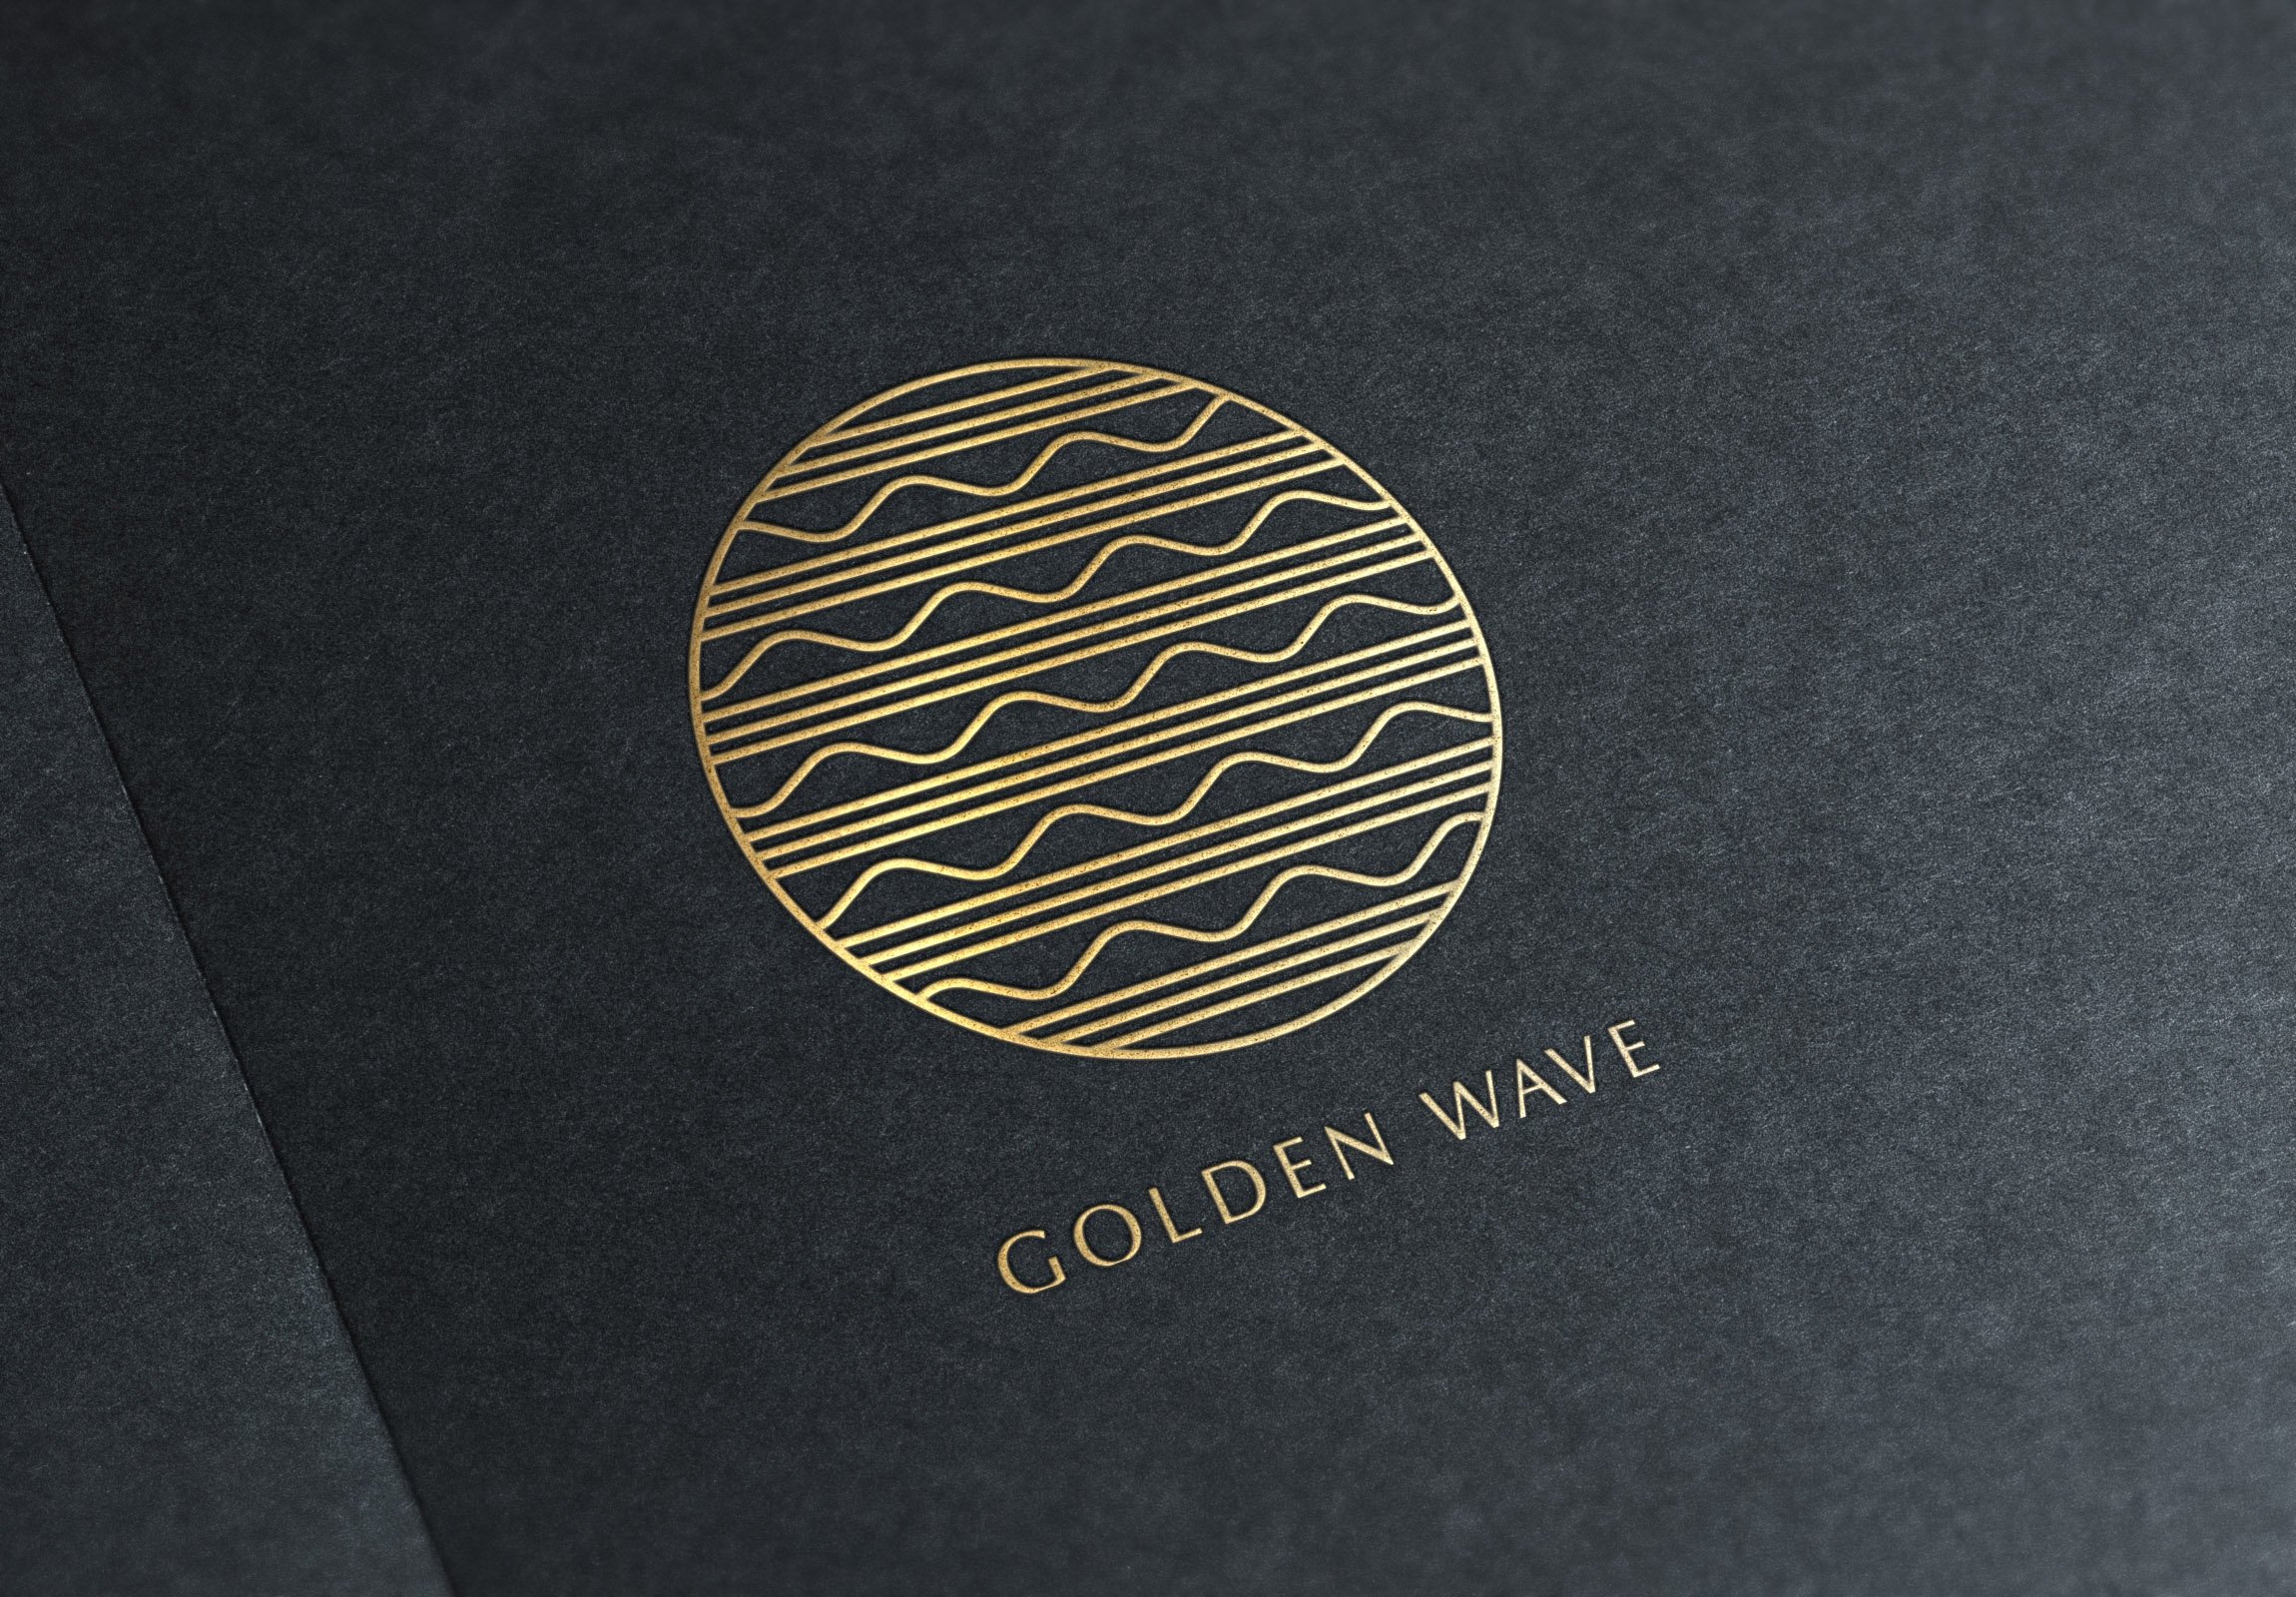 Matte black background with round gold logo with thin wavy lines.